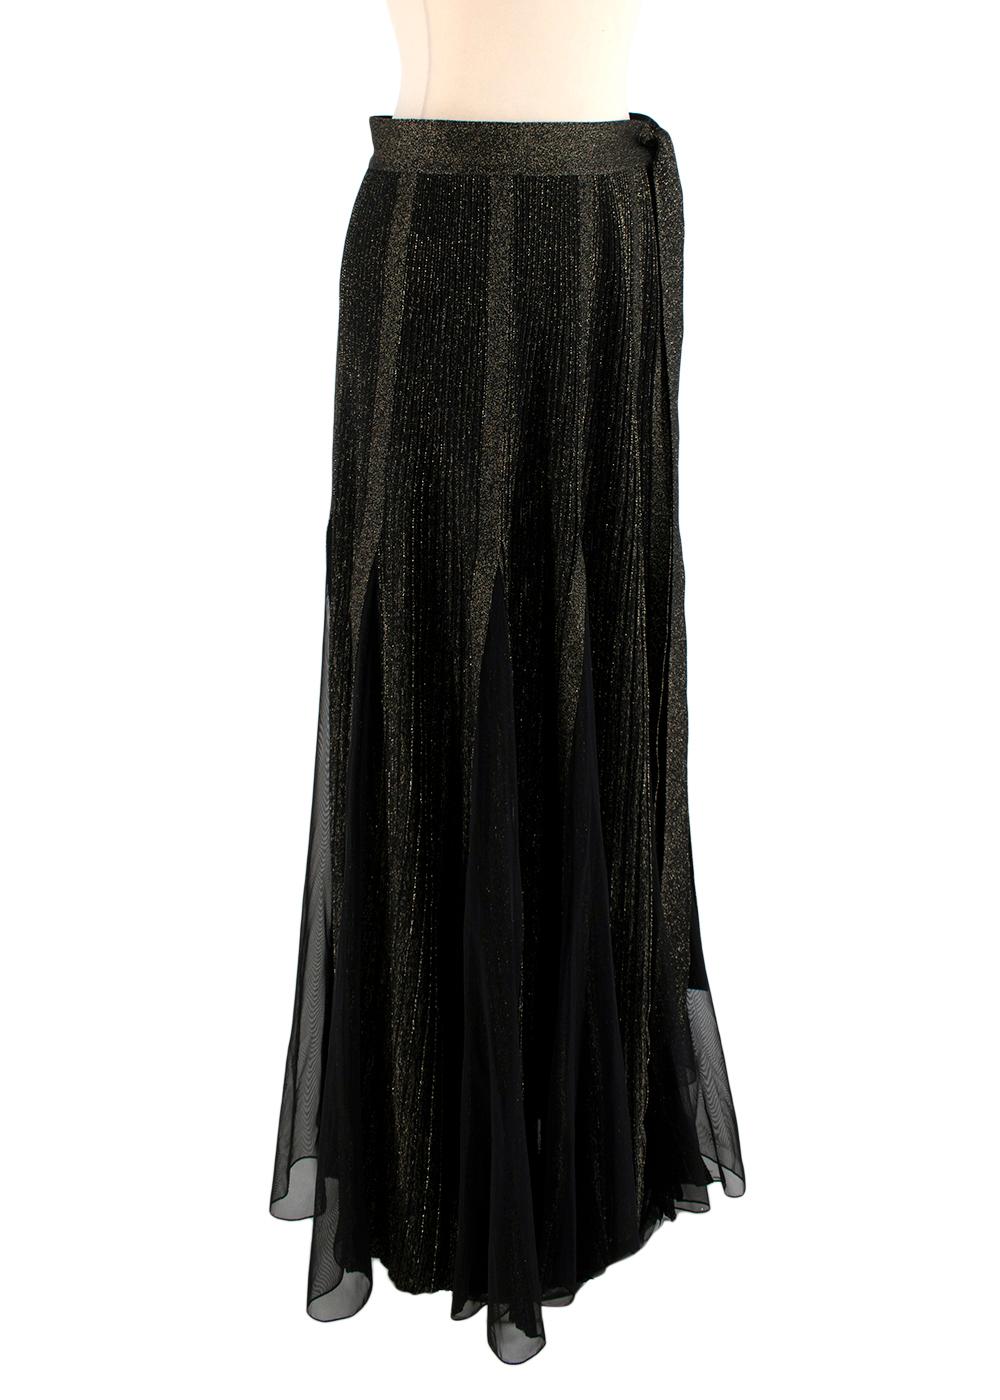 Elie Saab Black & Gold Sparkle Panelled Mesh Maxi Skirt

- Dense fine knit, with gold-tone sparkle throughout
- Faux-pleated effect with added sheer tulle mesh panels creating movement
- Press-stud closure to the side finished with a self-tie ribbon